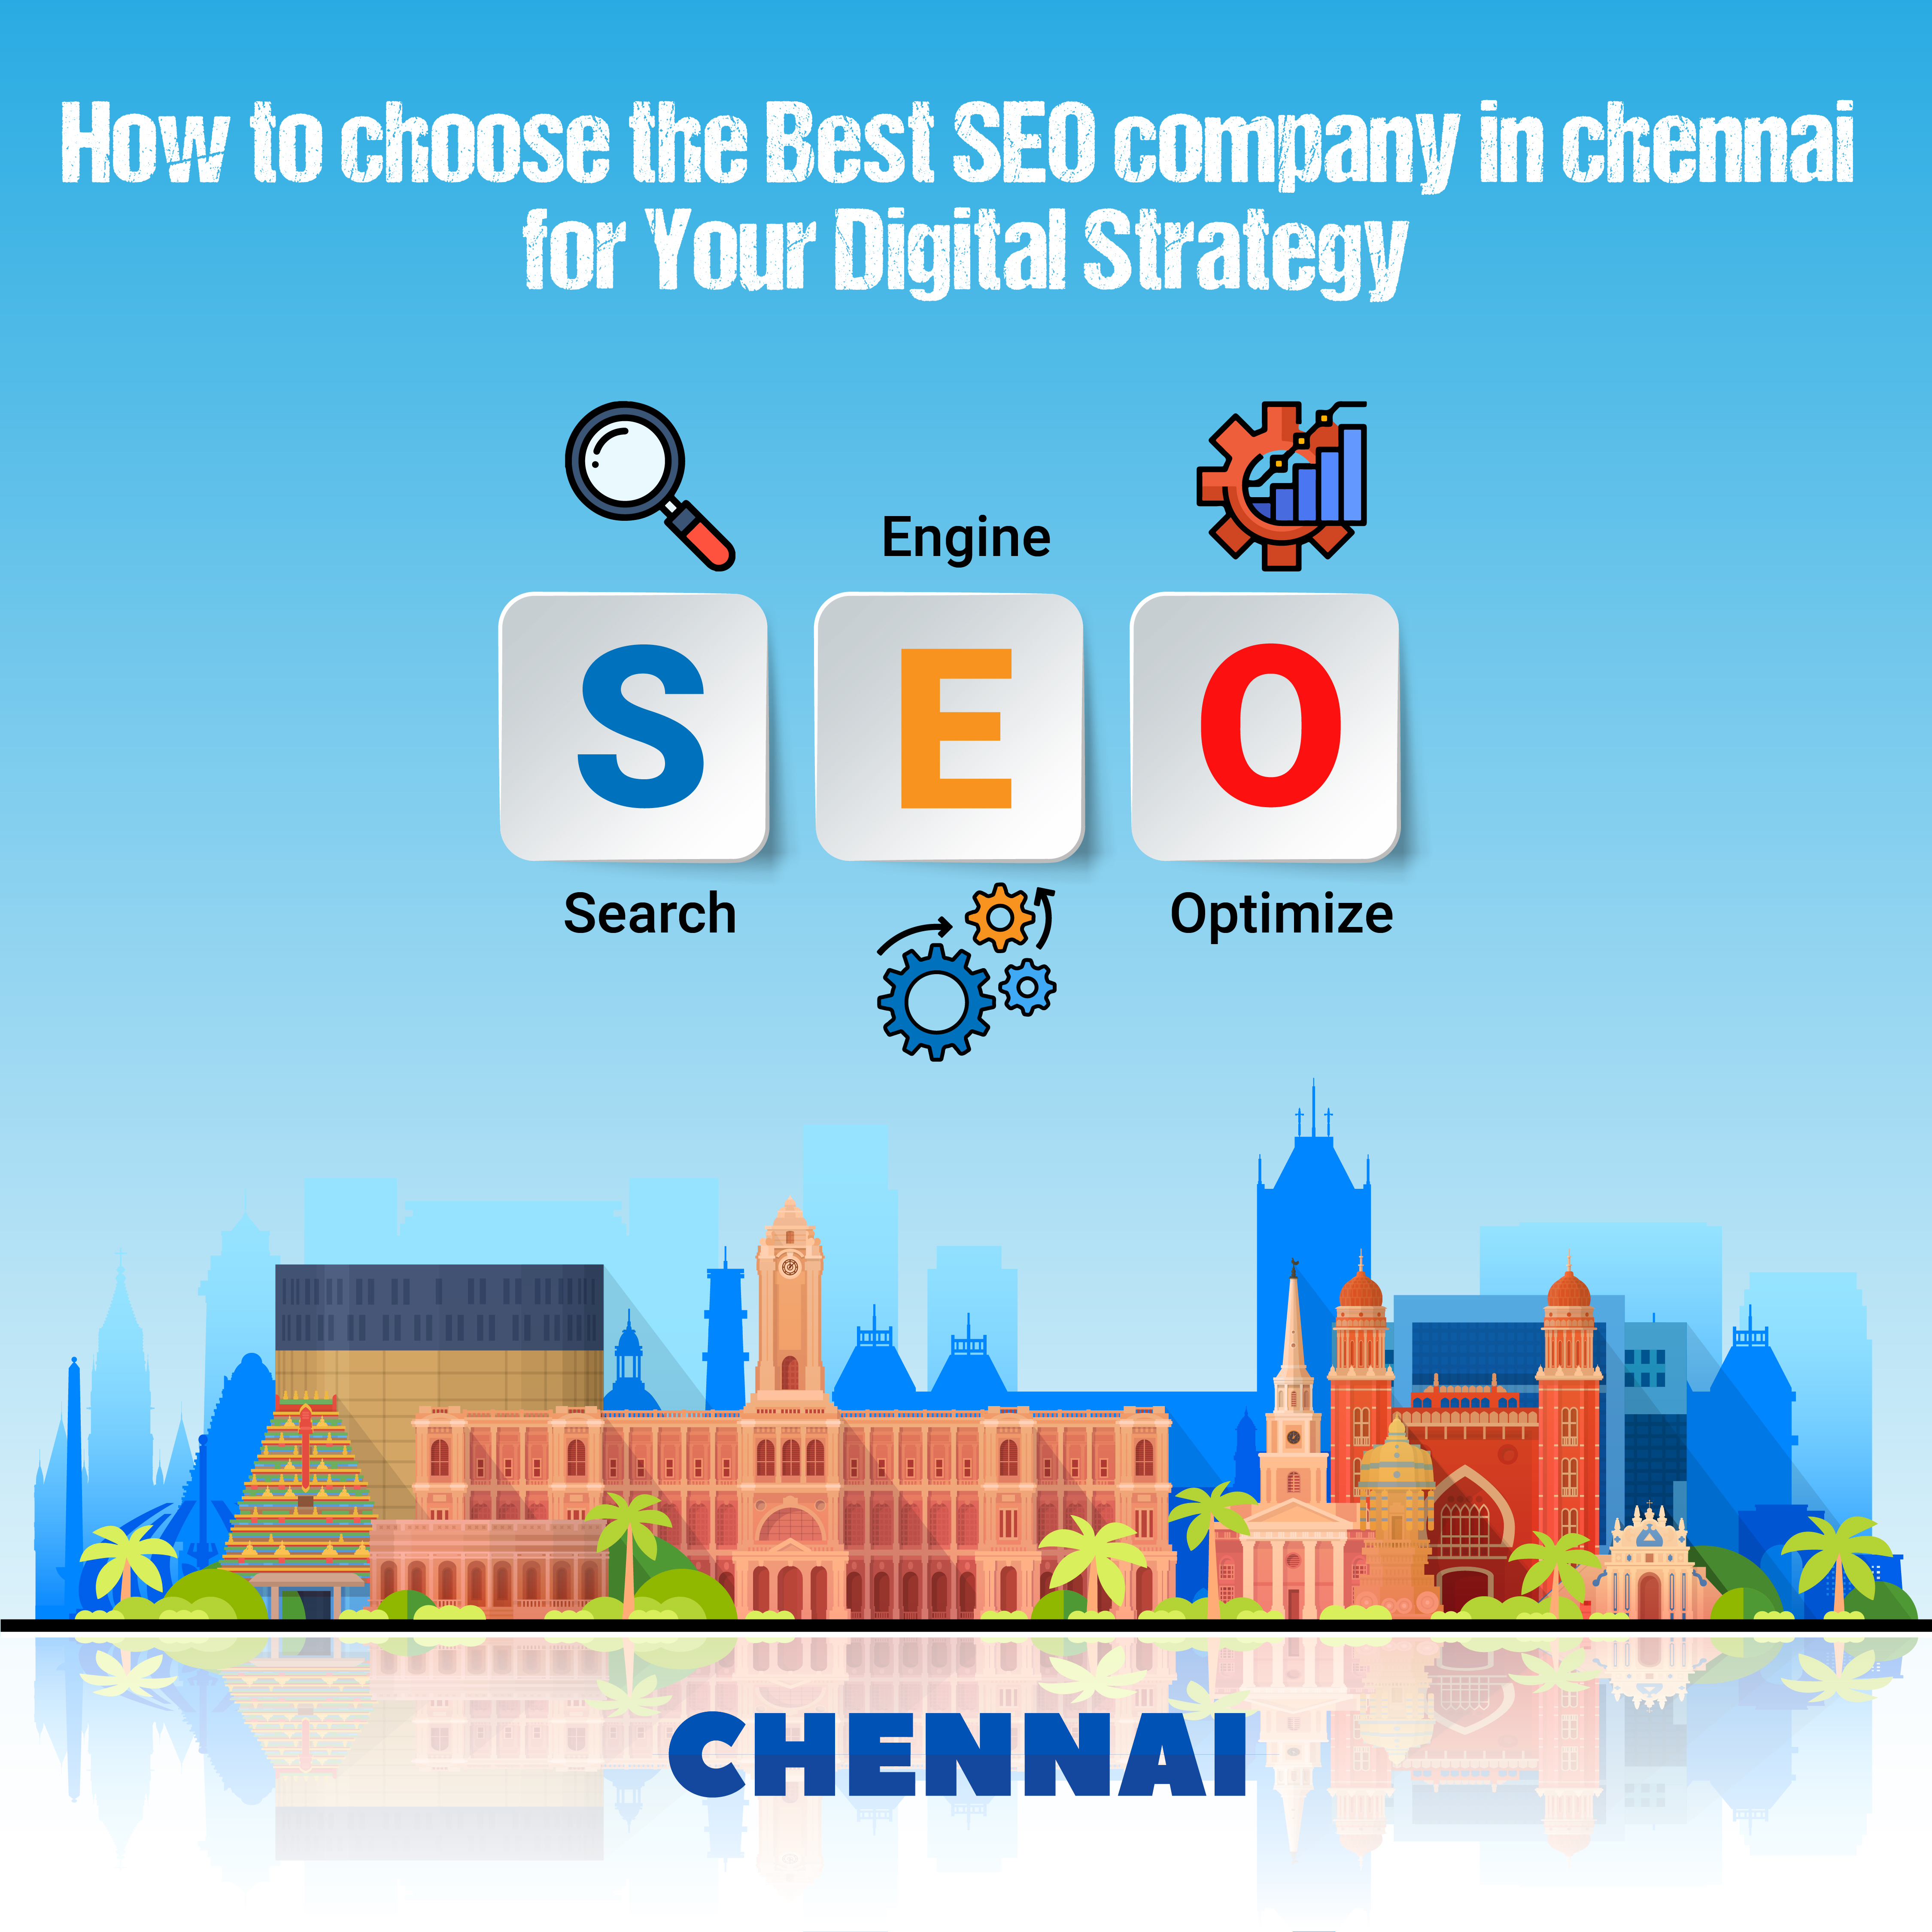 How to choose the Best SEO company in chennai for Your Digital Strategy